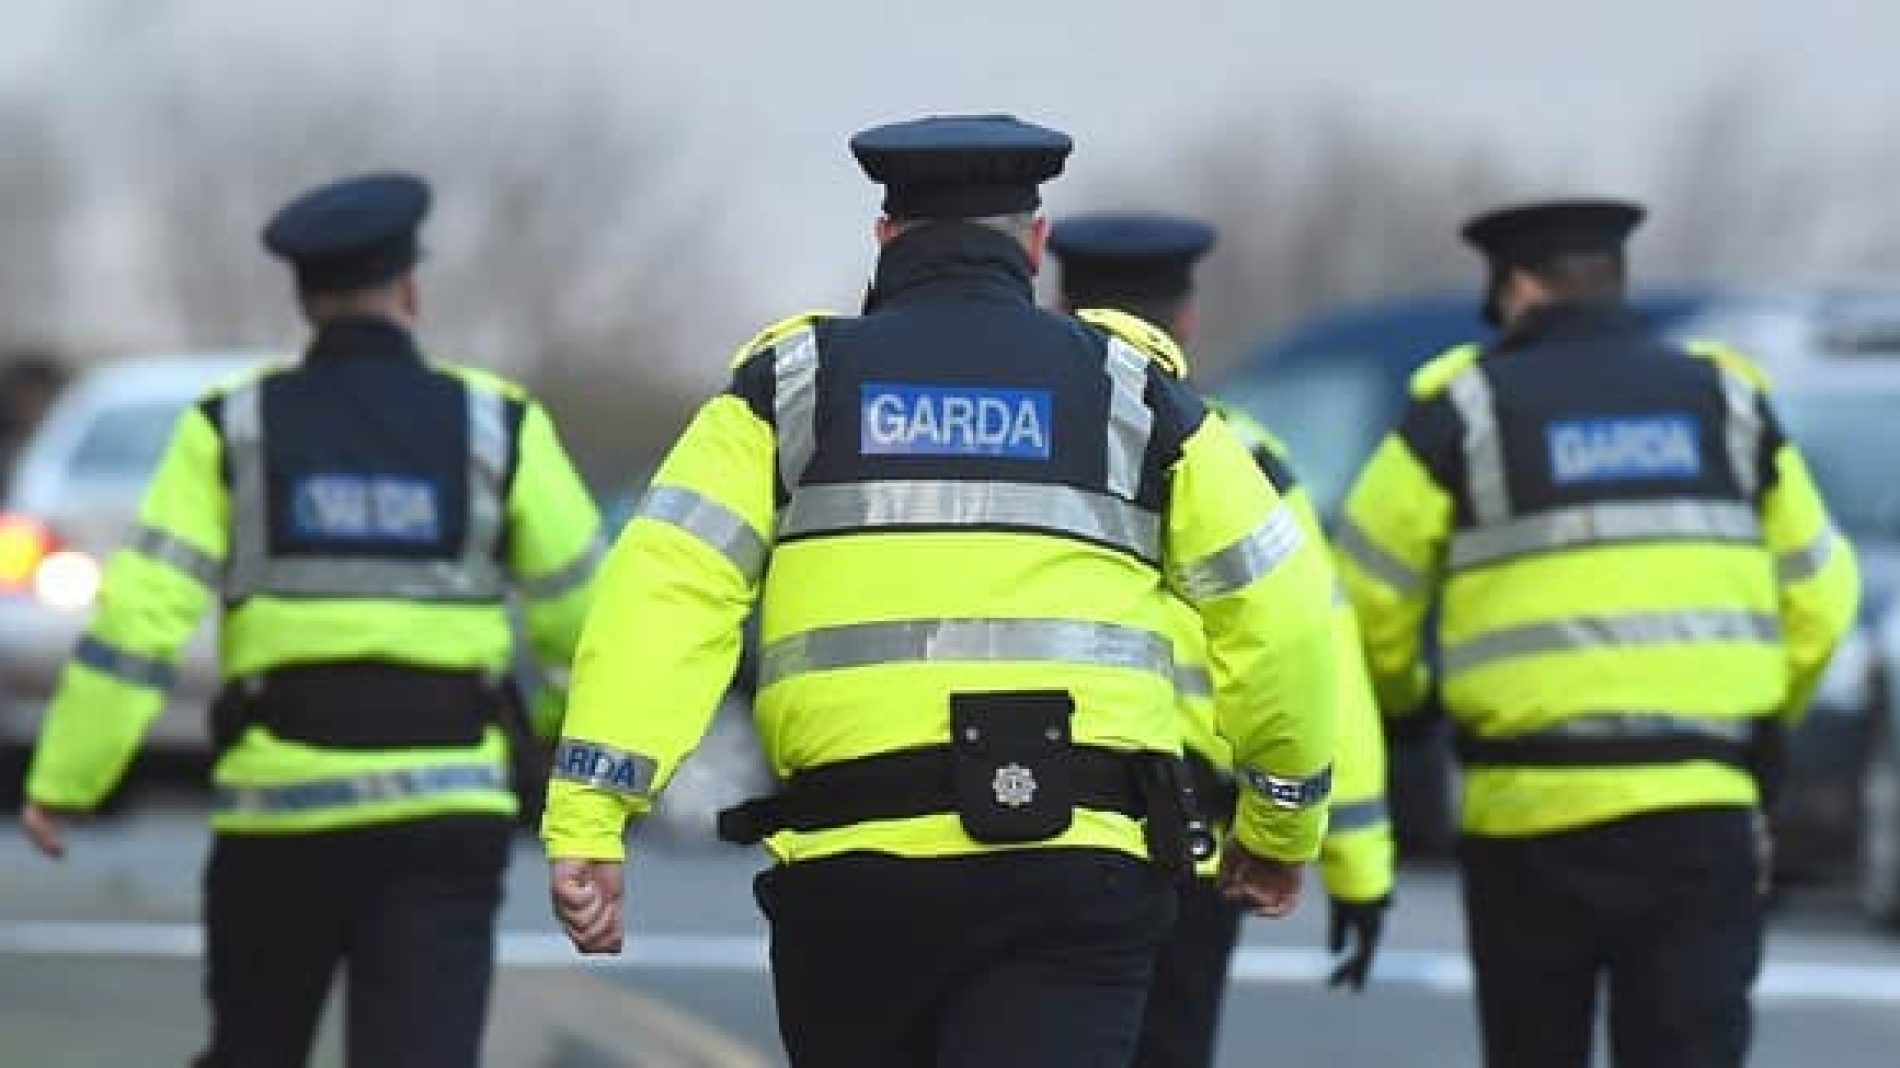 A group of gardaí with their backs to the camera